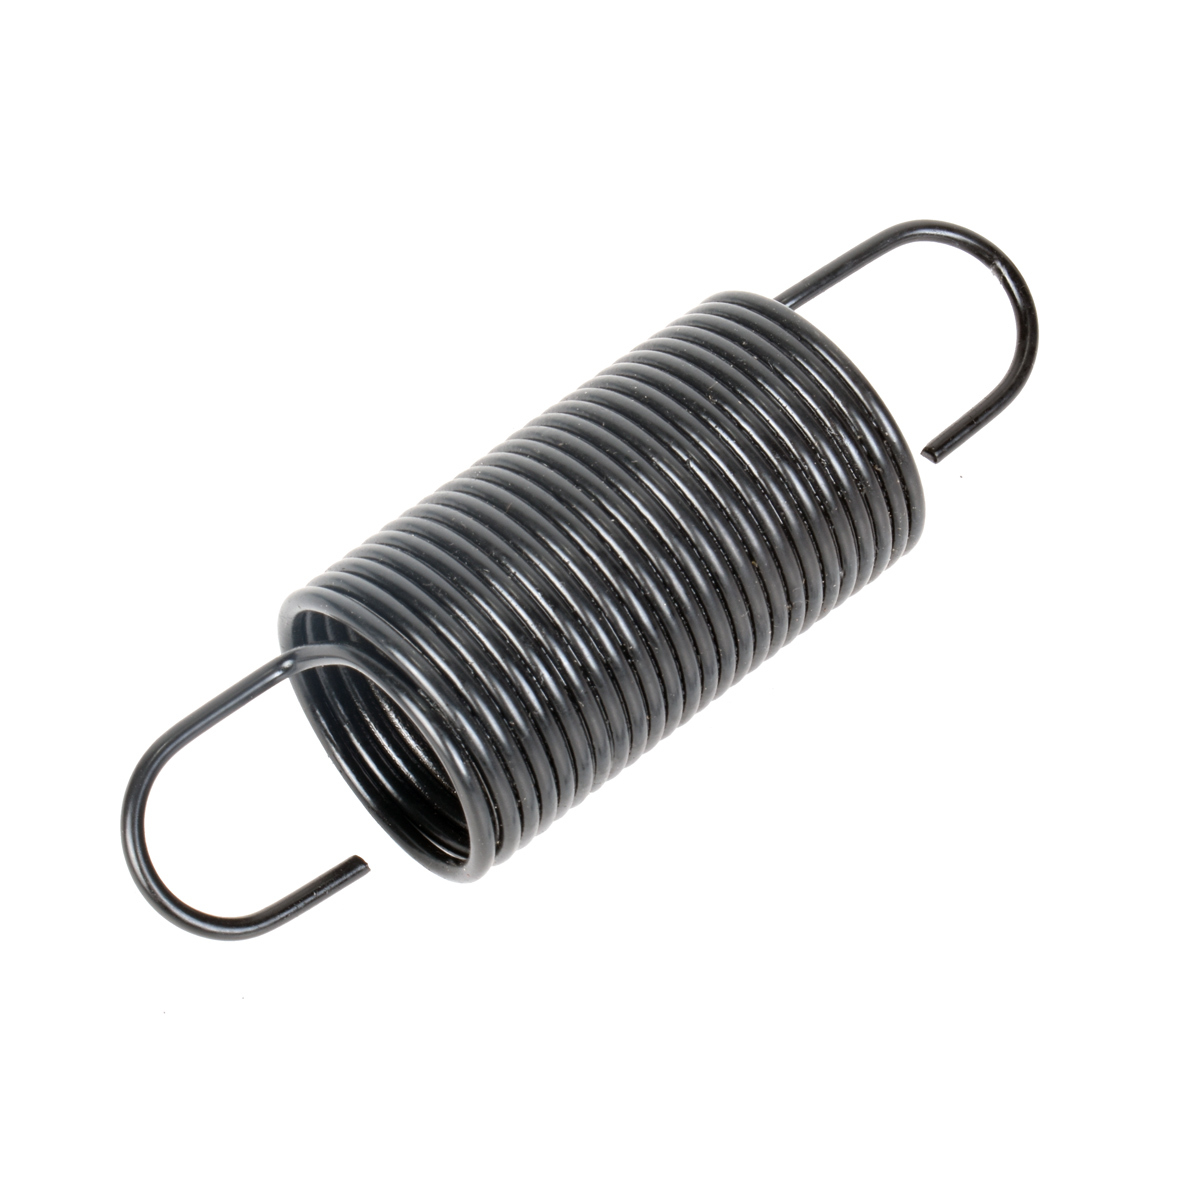 Mower Deck Extension Spring  or Parking Brake Spring for Z200 and Z400 Series